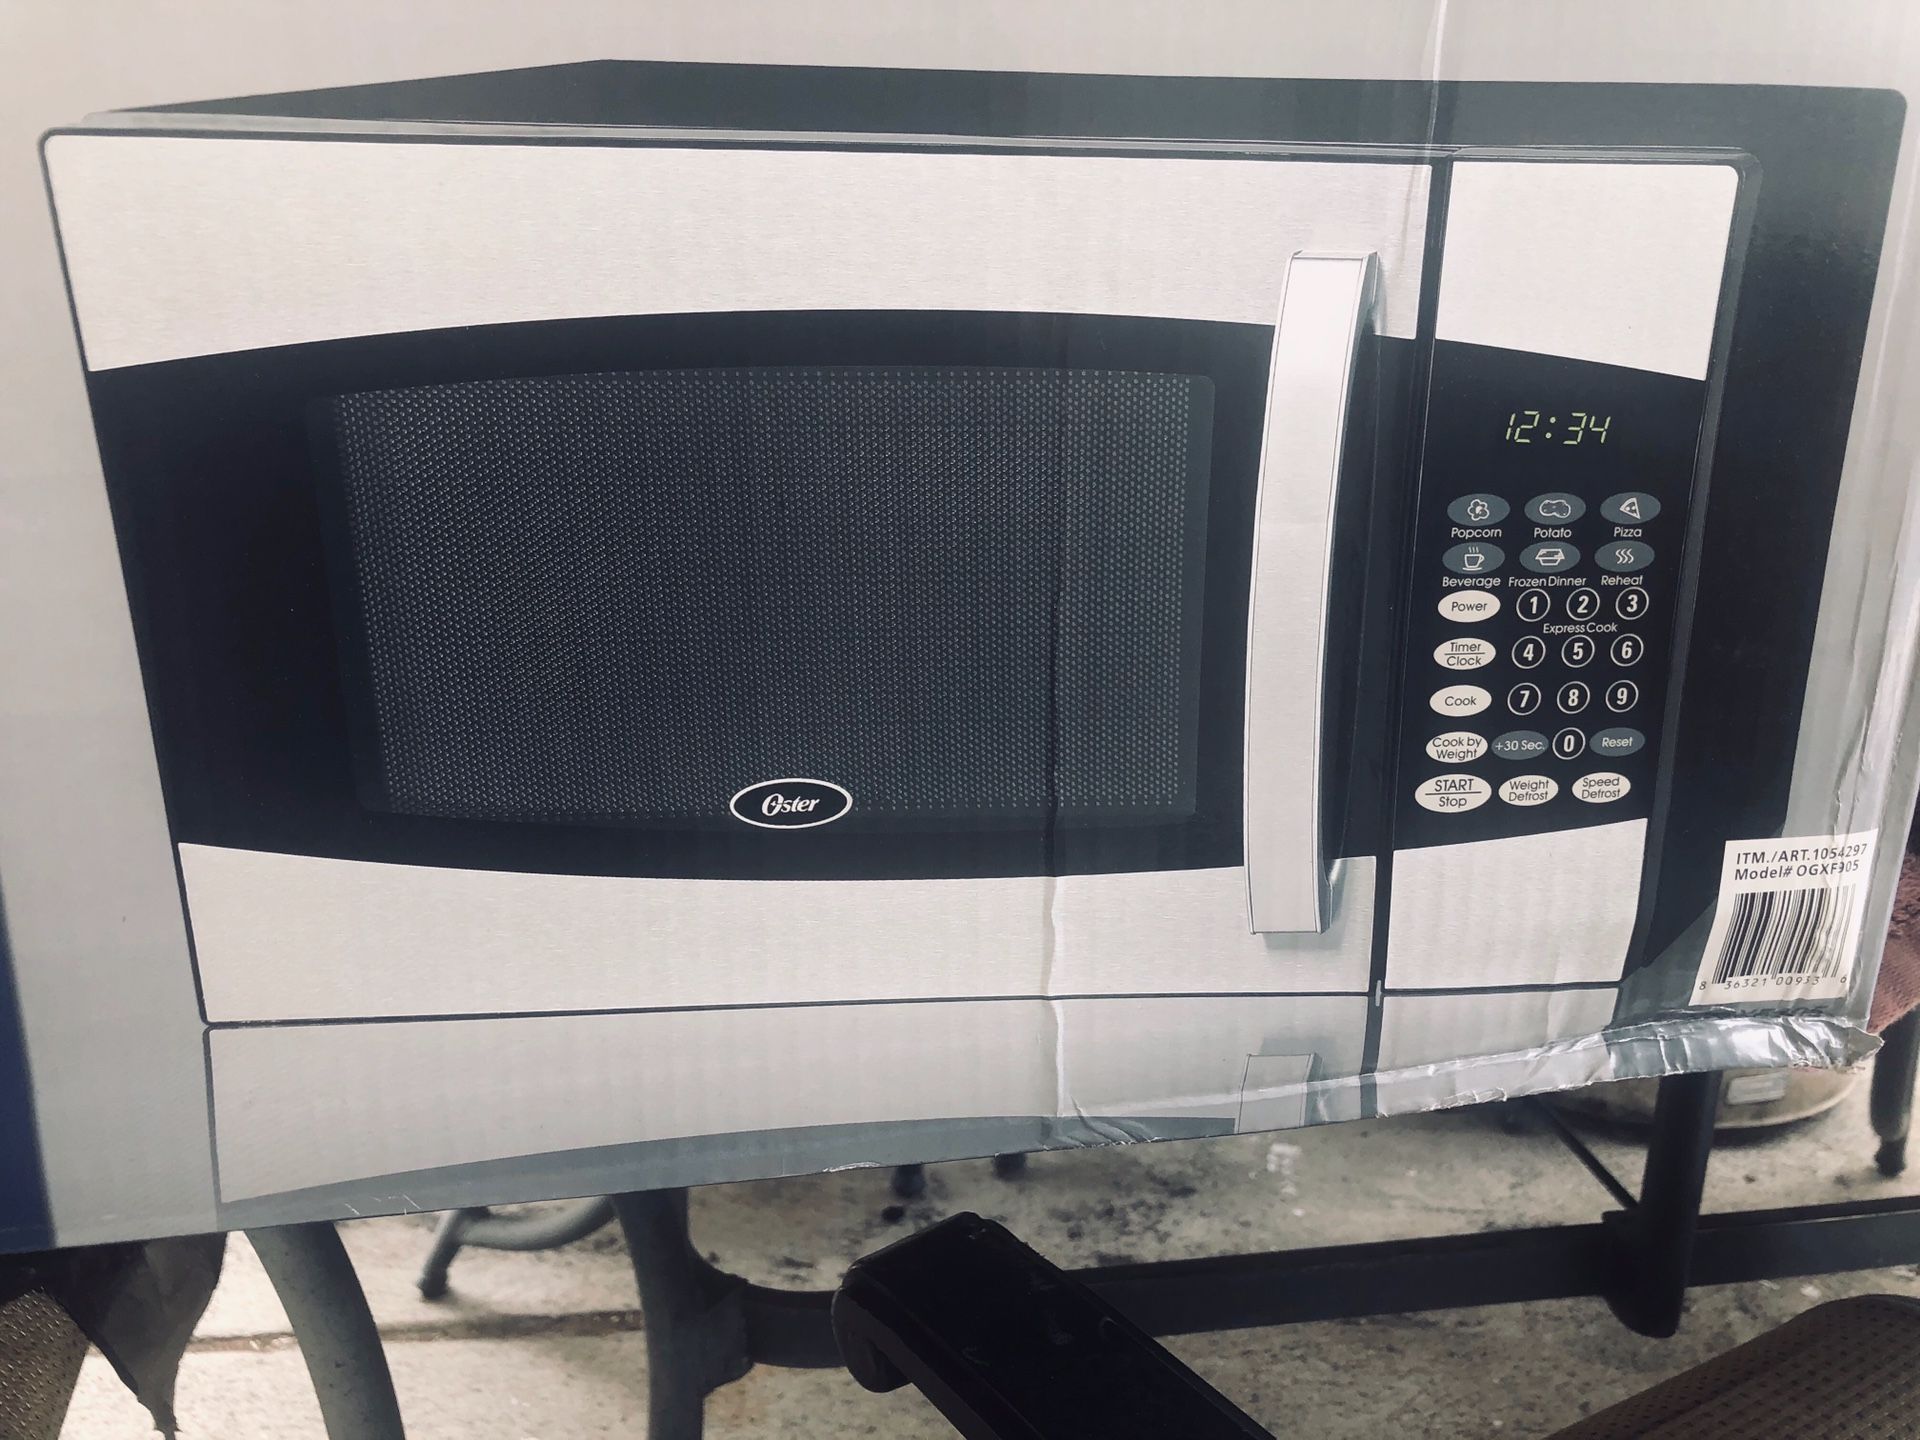 Oster Microwave